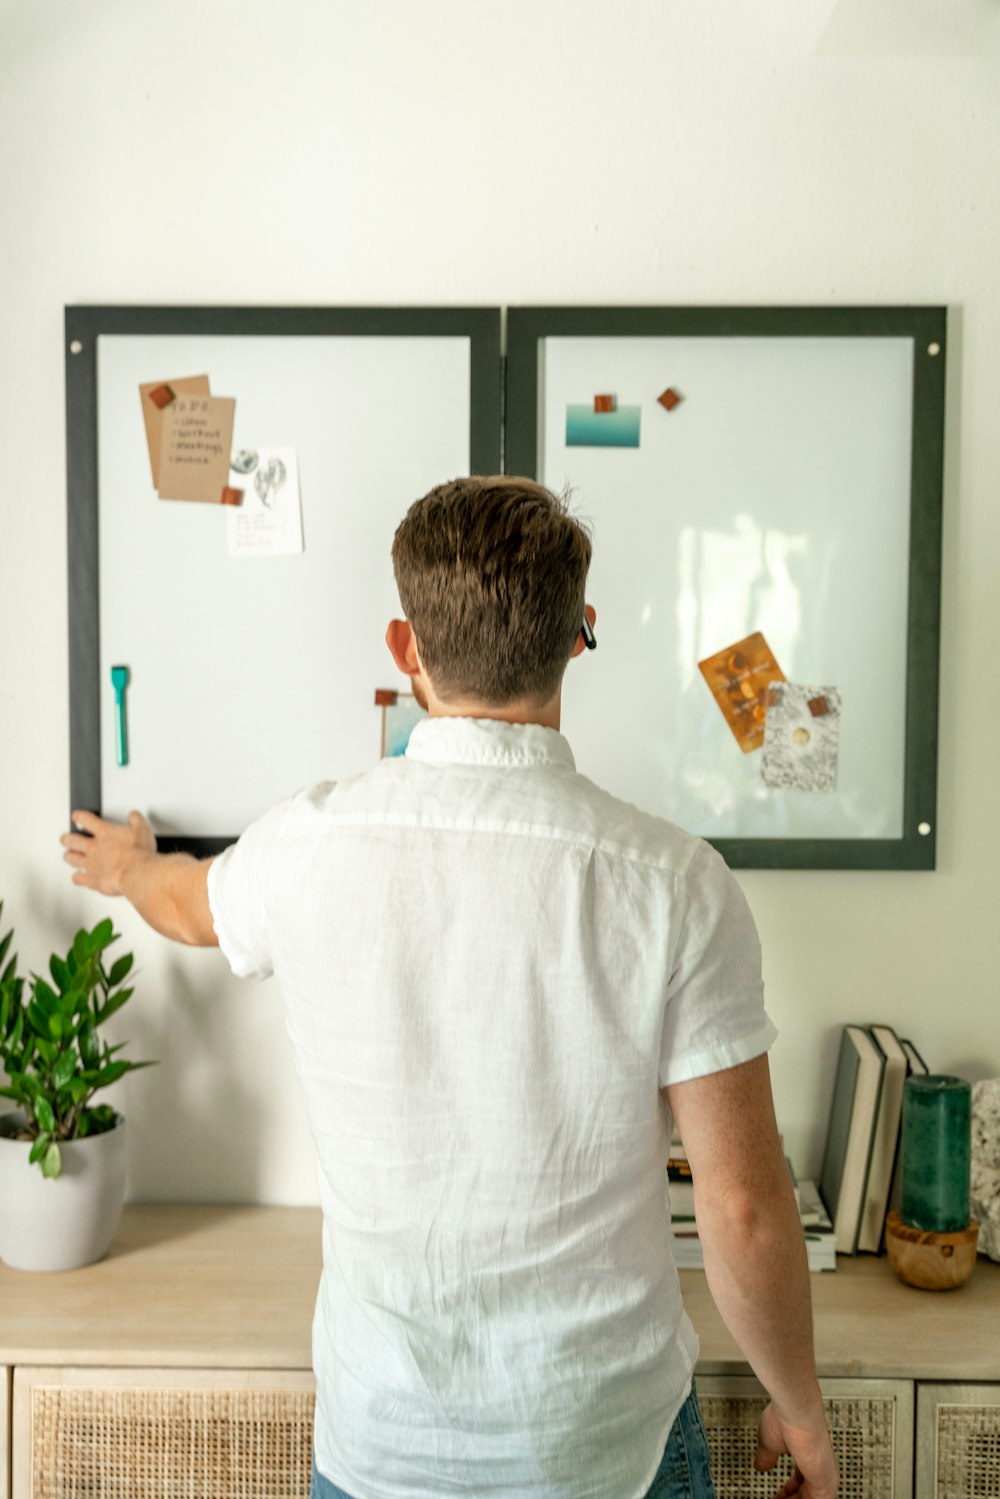 a man standing in front of a whiteboard with magnets on it